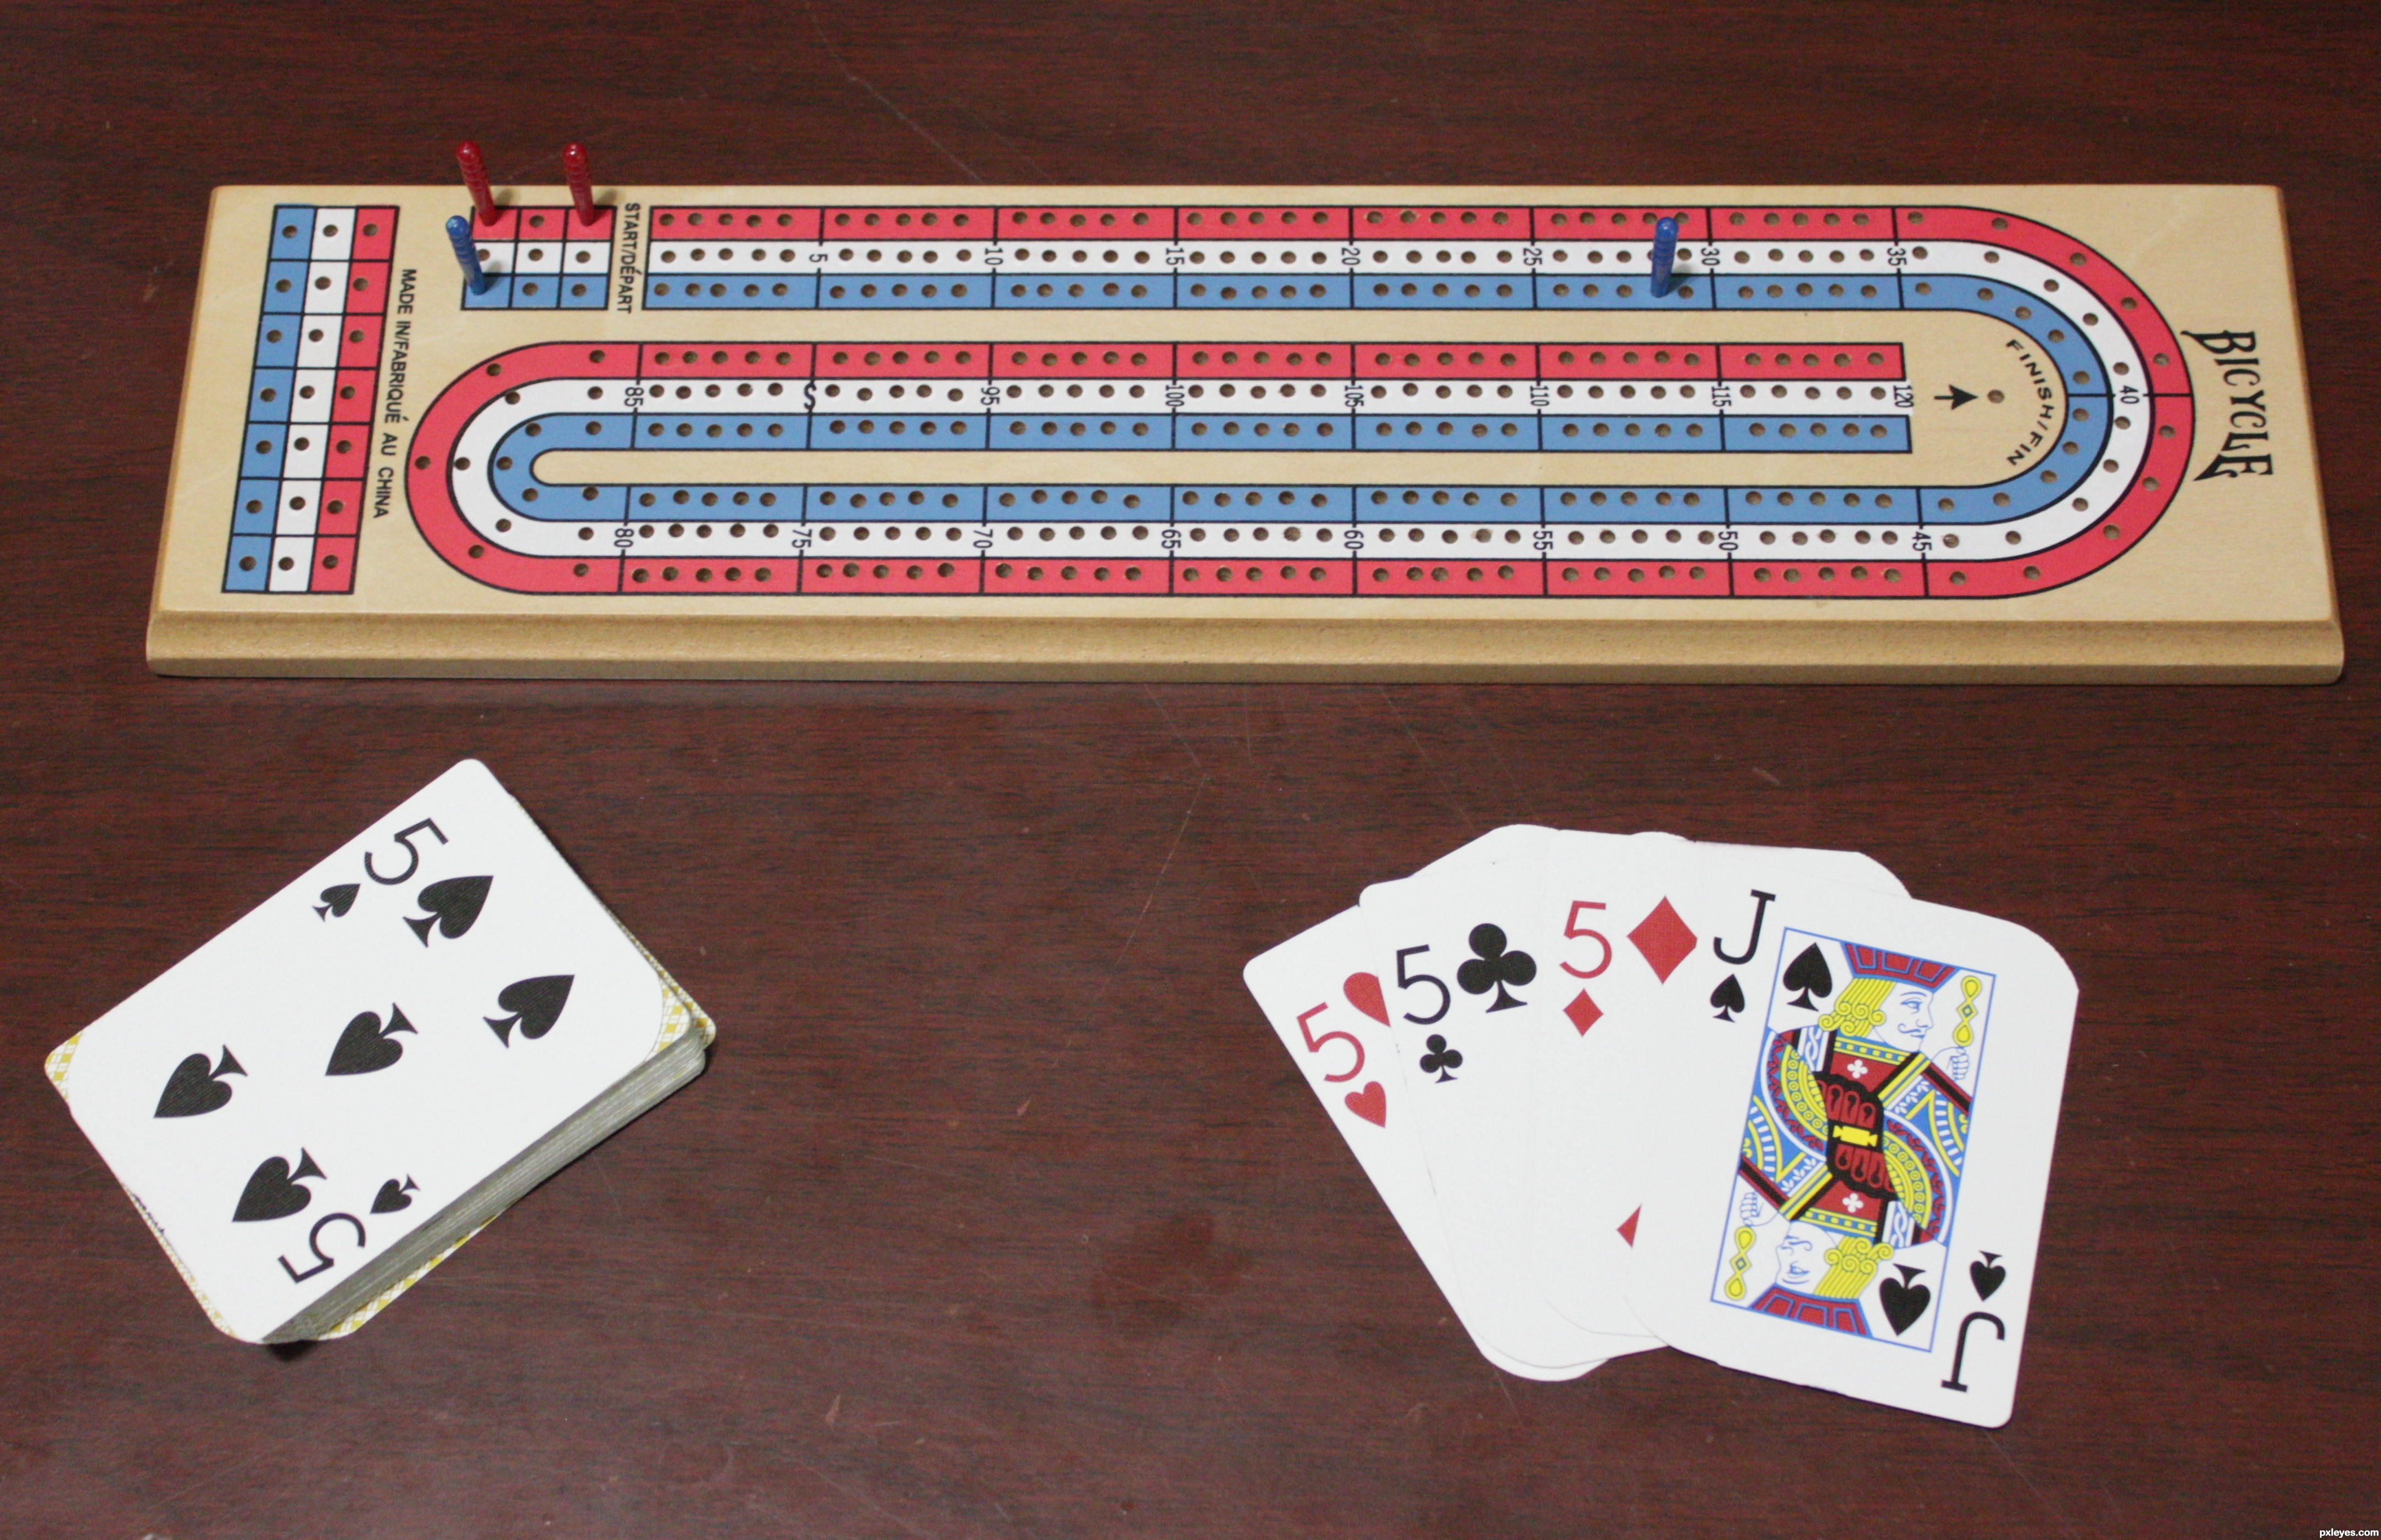 Twenty Nine   Highest Cribbage Hand Picture By Teecee For  Playing    